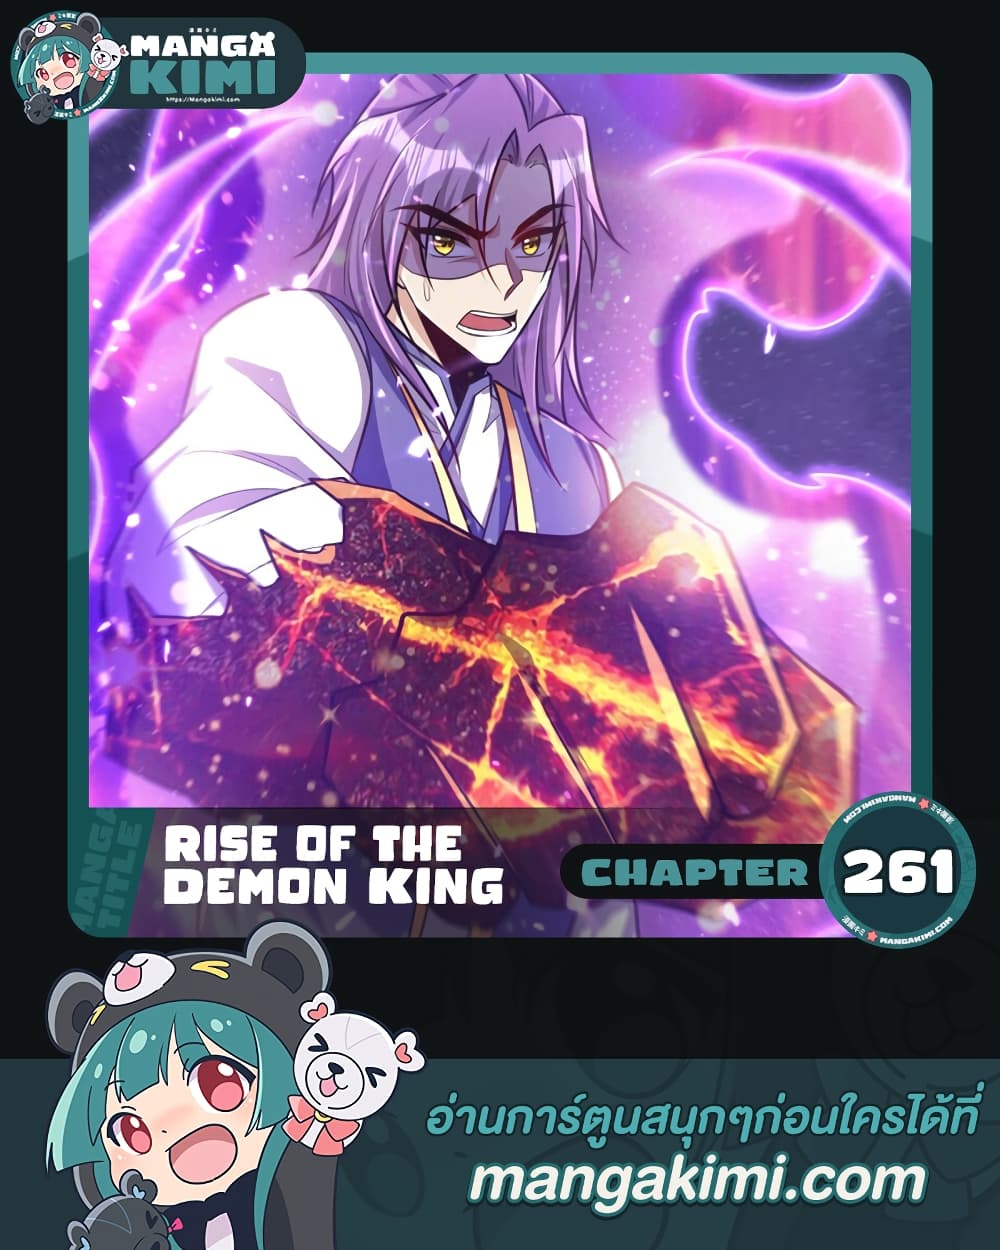 Rise of The Demon King เธฃเธธเนเธเธญเธฃเธธเธ“เนเธซเนเธเธฃเธฒเธเธฒเธเธตเธจเธฒเธ เธ•เธญเธเธ—เธตเน 261 (1)